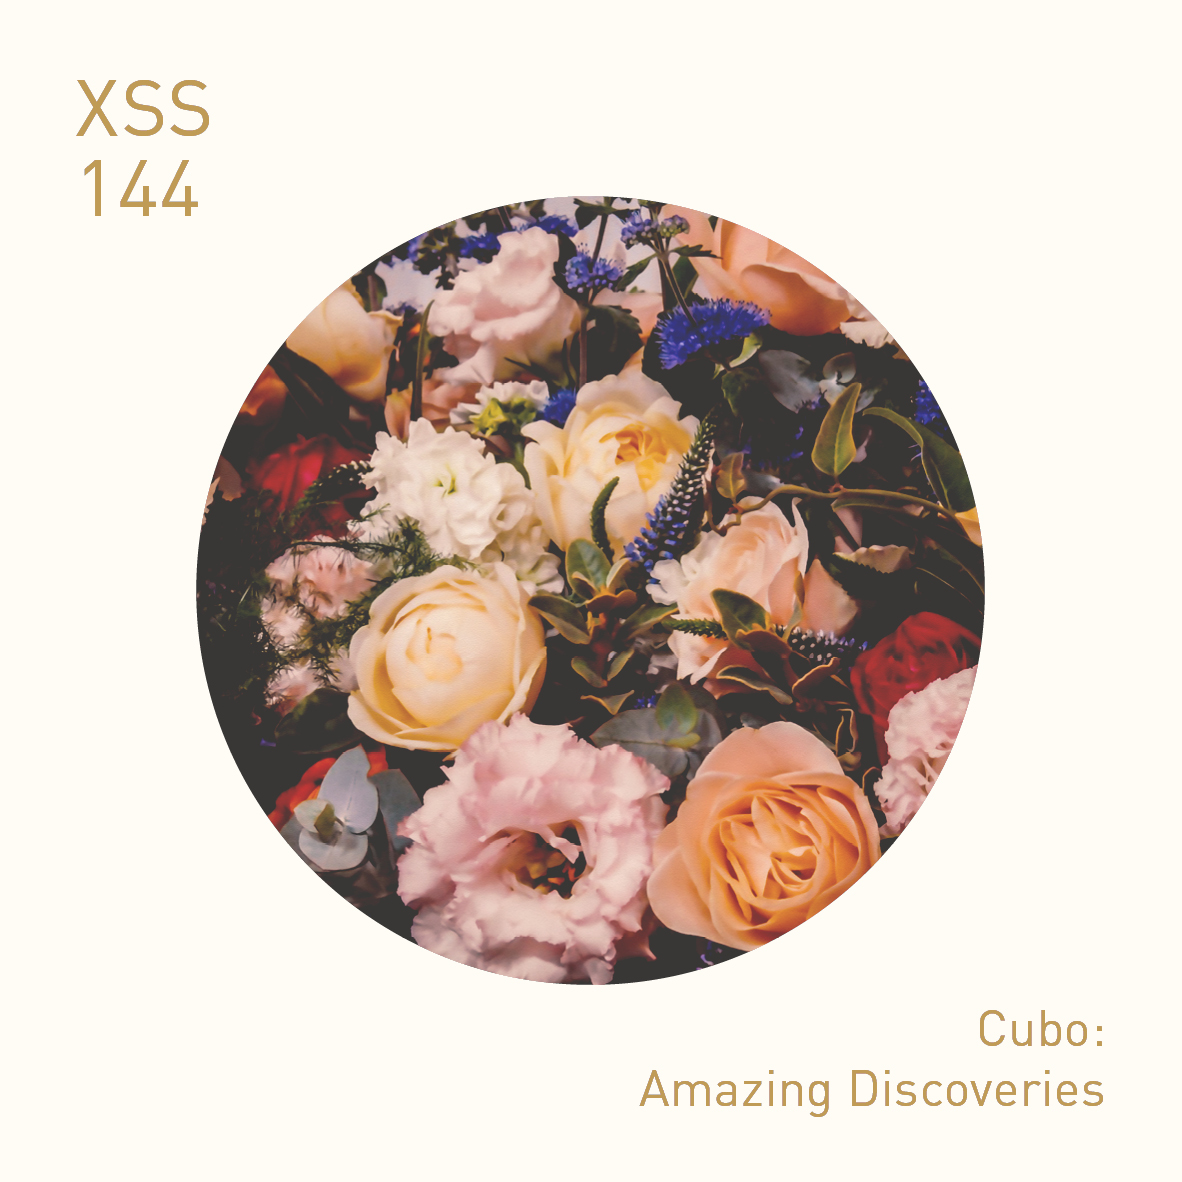 XSS144 | Cubo | Amazing Discoveries